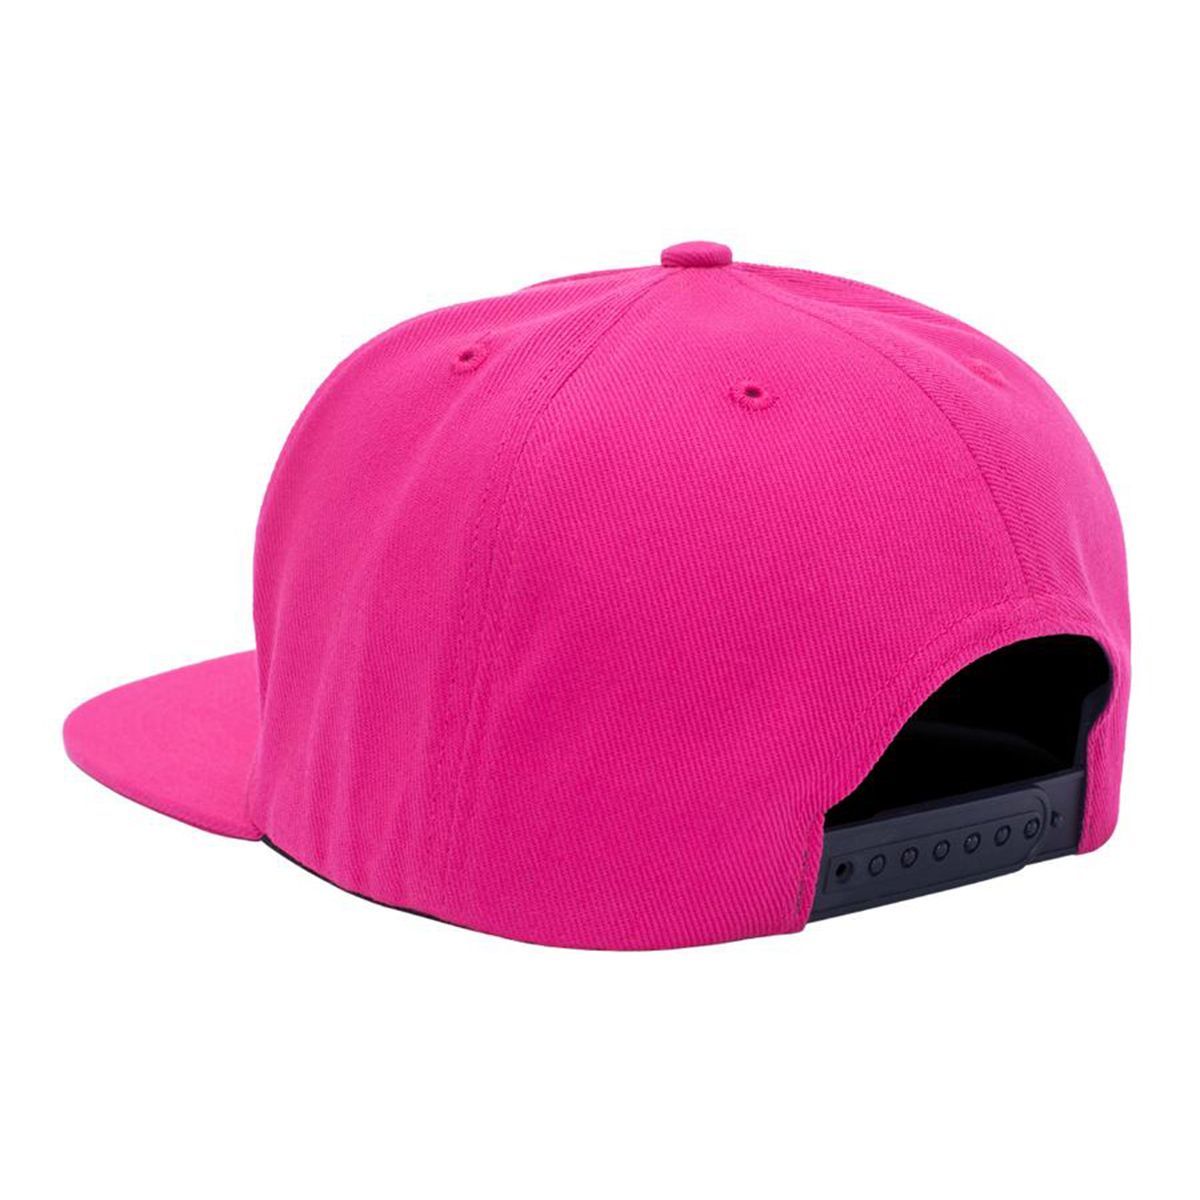 Fucking Awesome - Gorro Snapback Redemption Pink